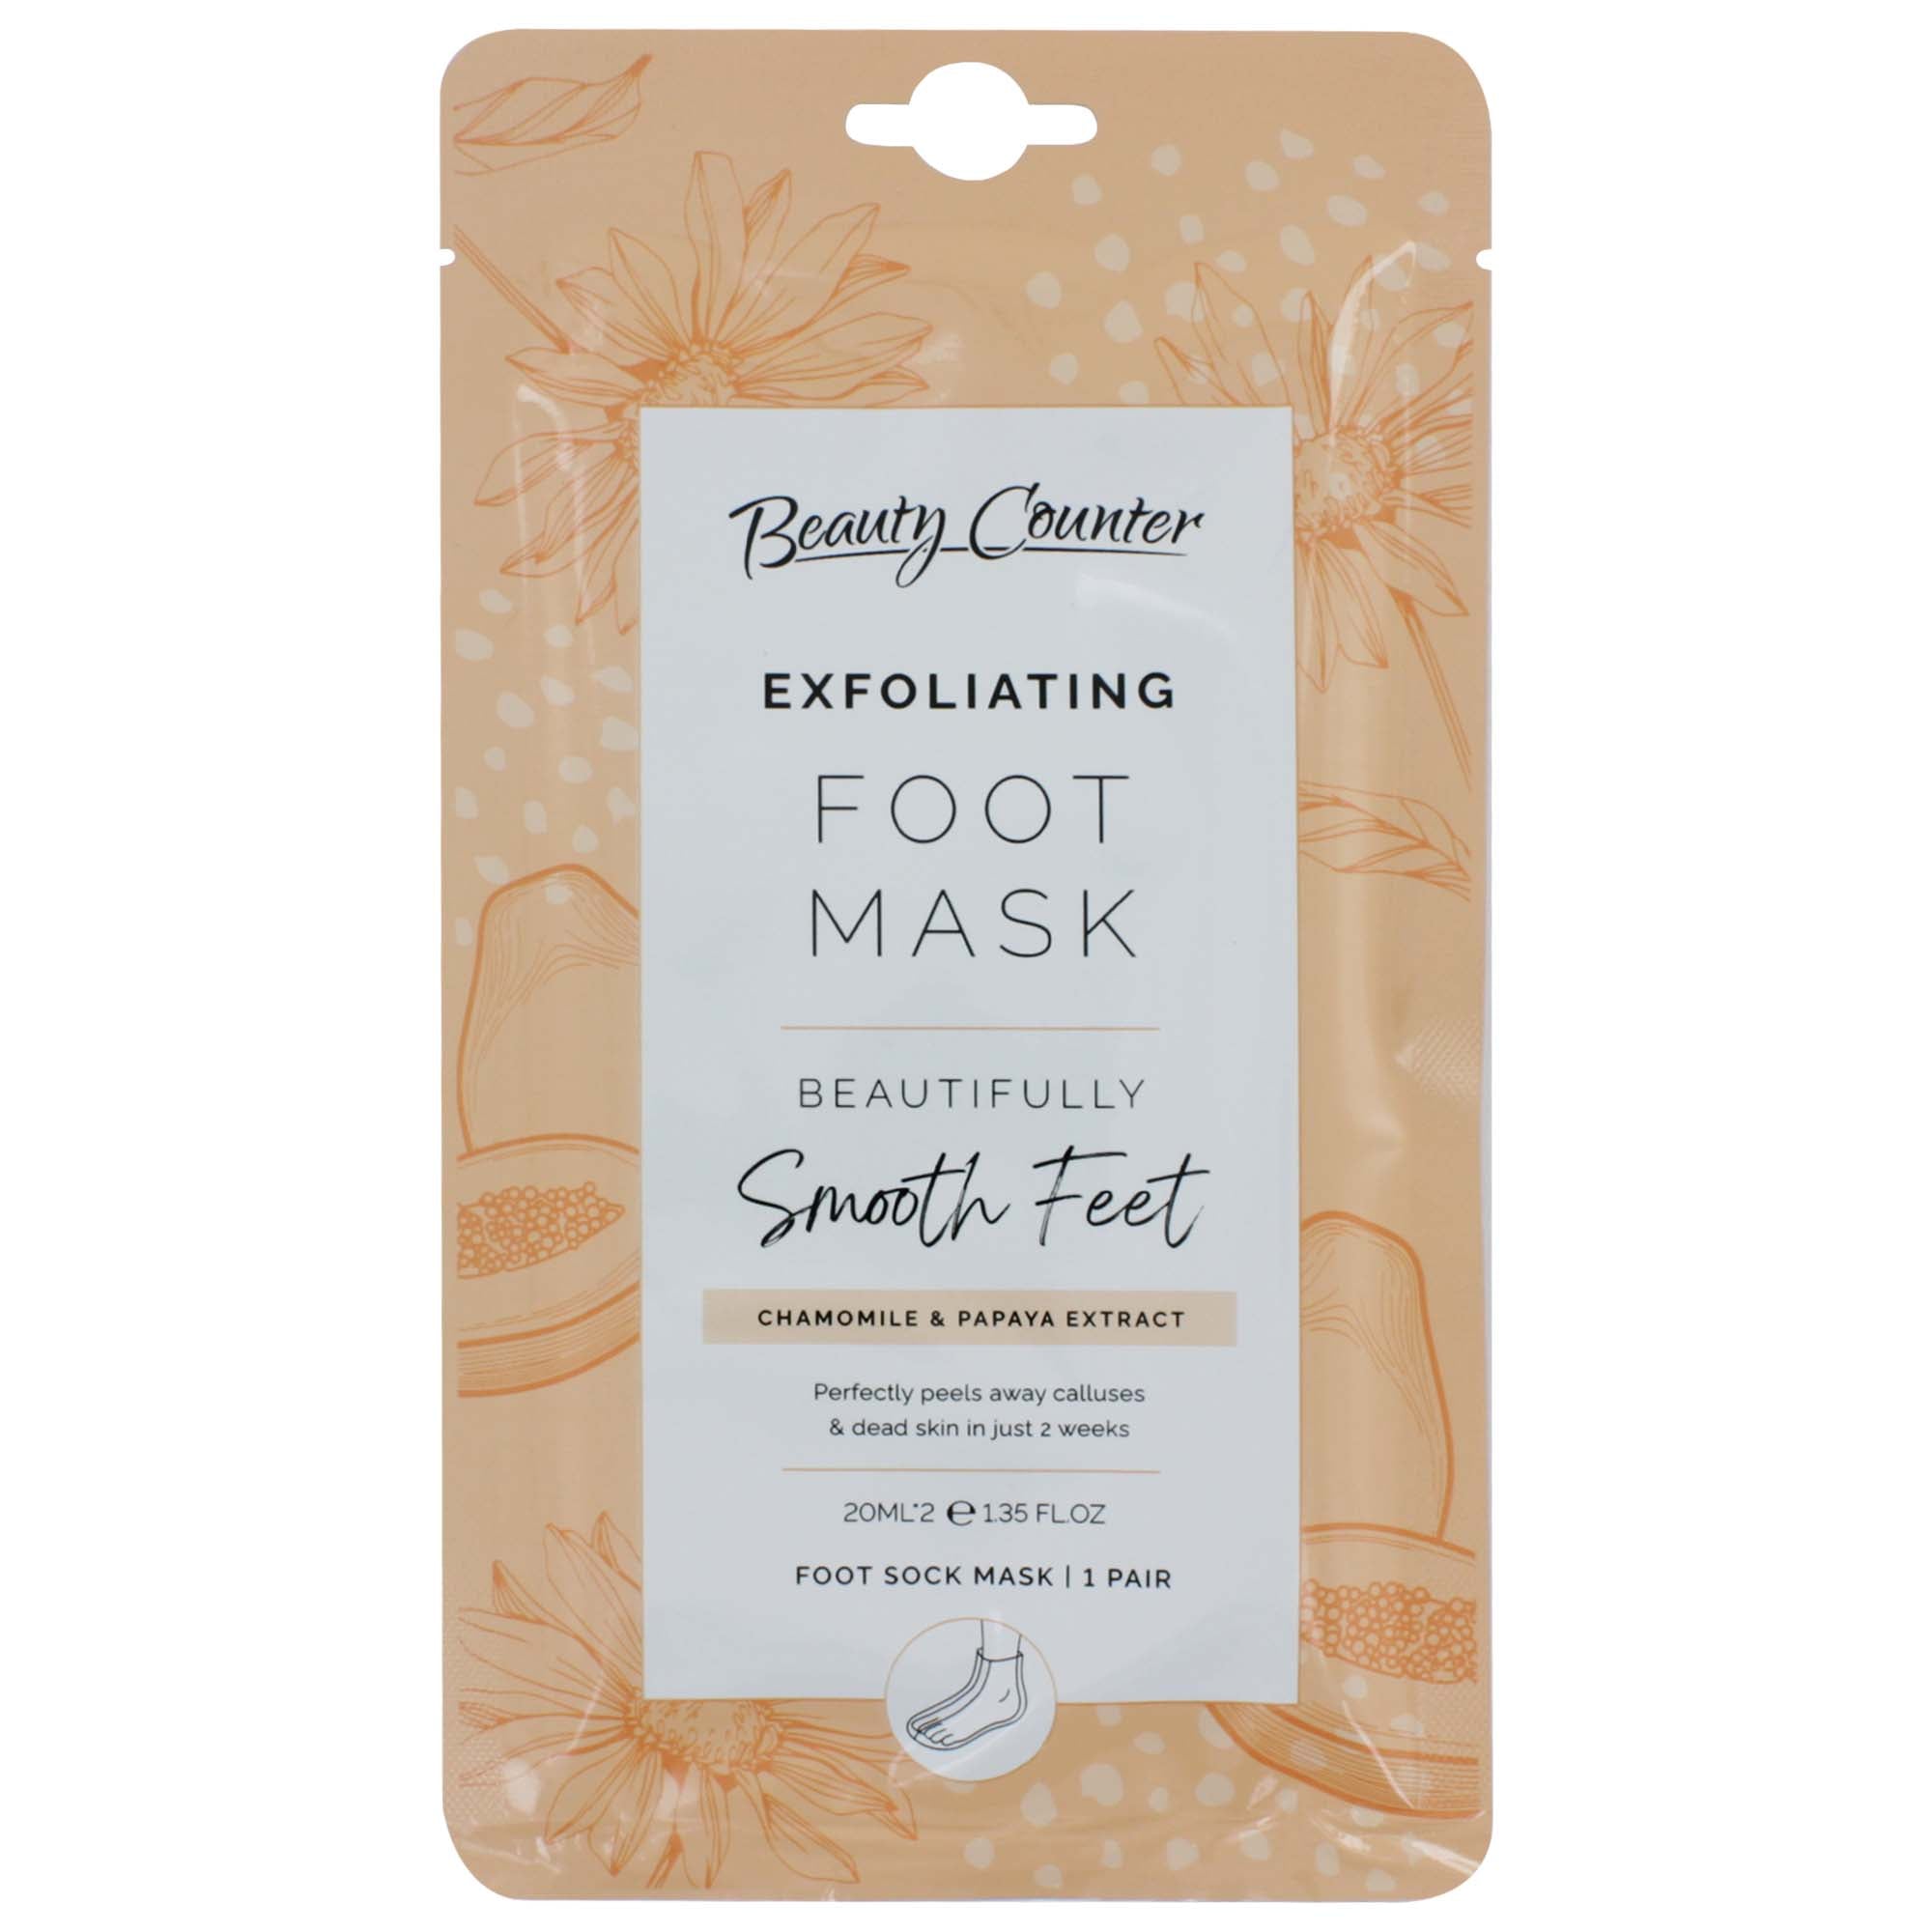 Beauty Counter Exfoliating Foot Mask